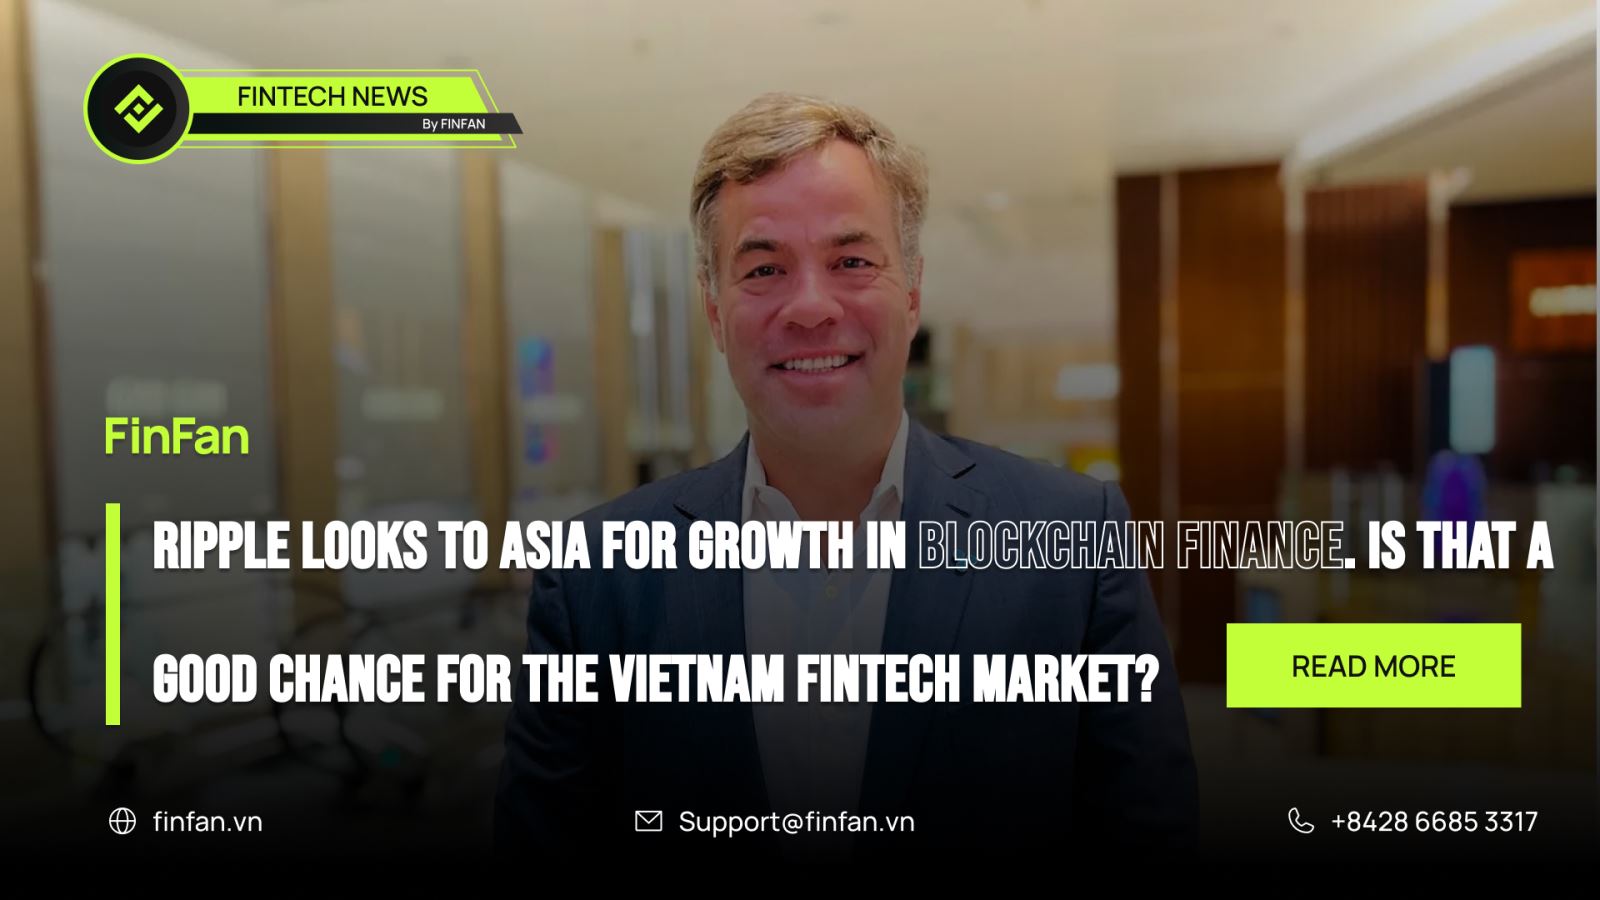 Ripple looks to Asia for growth in blockchain finance. Is that a good chance for the Vietnam fintech market?